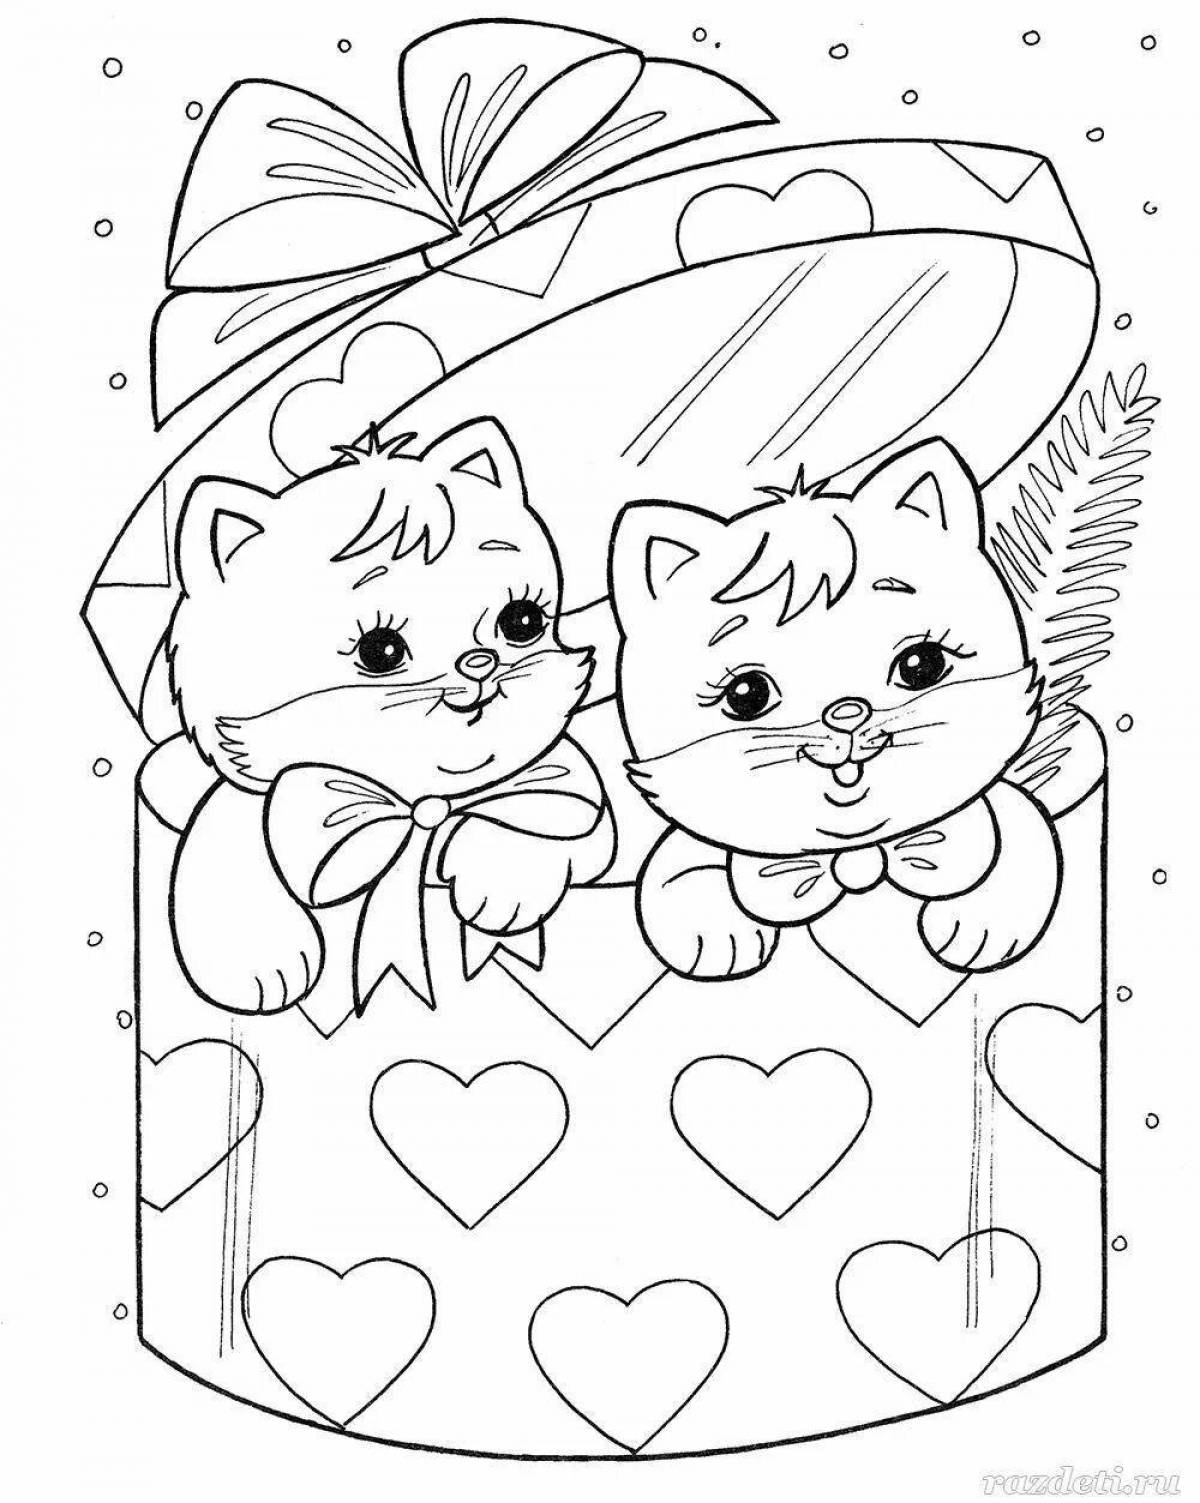 Cute kitty coloring book for 6-7 year olds